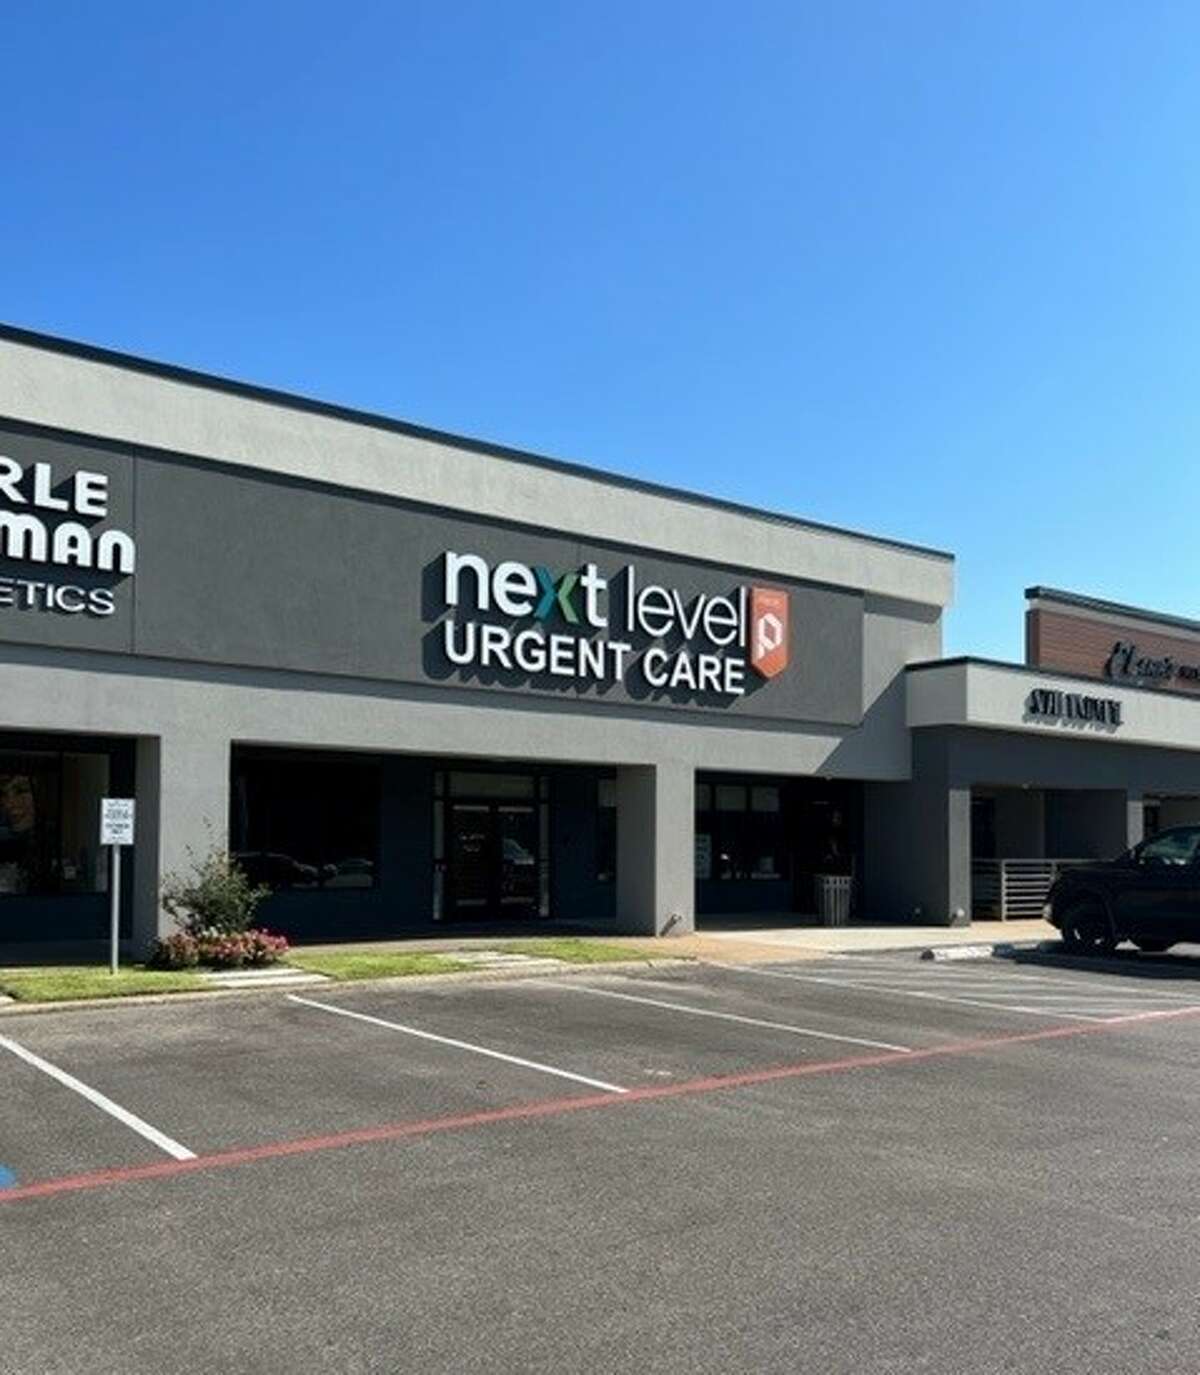 Next Level Urgent Care Adds Beaumont Clinic Nederland Location Coming Soon